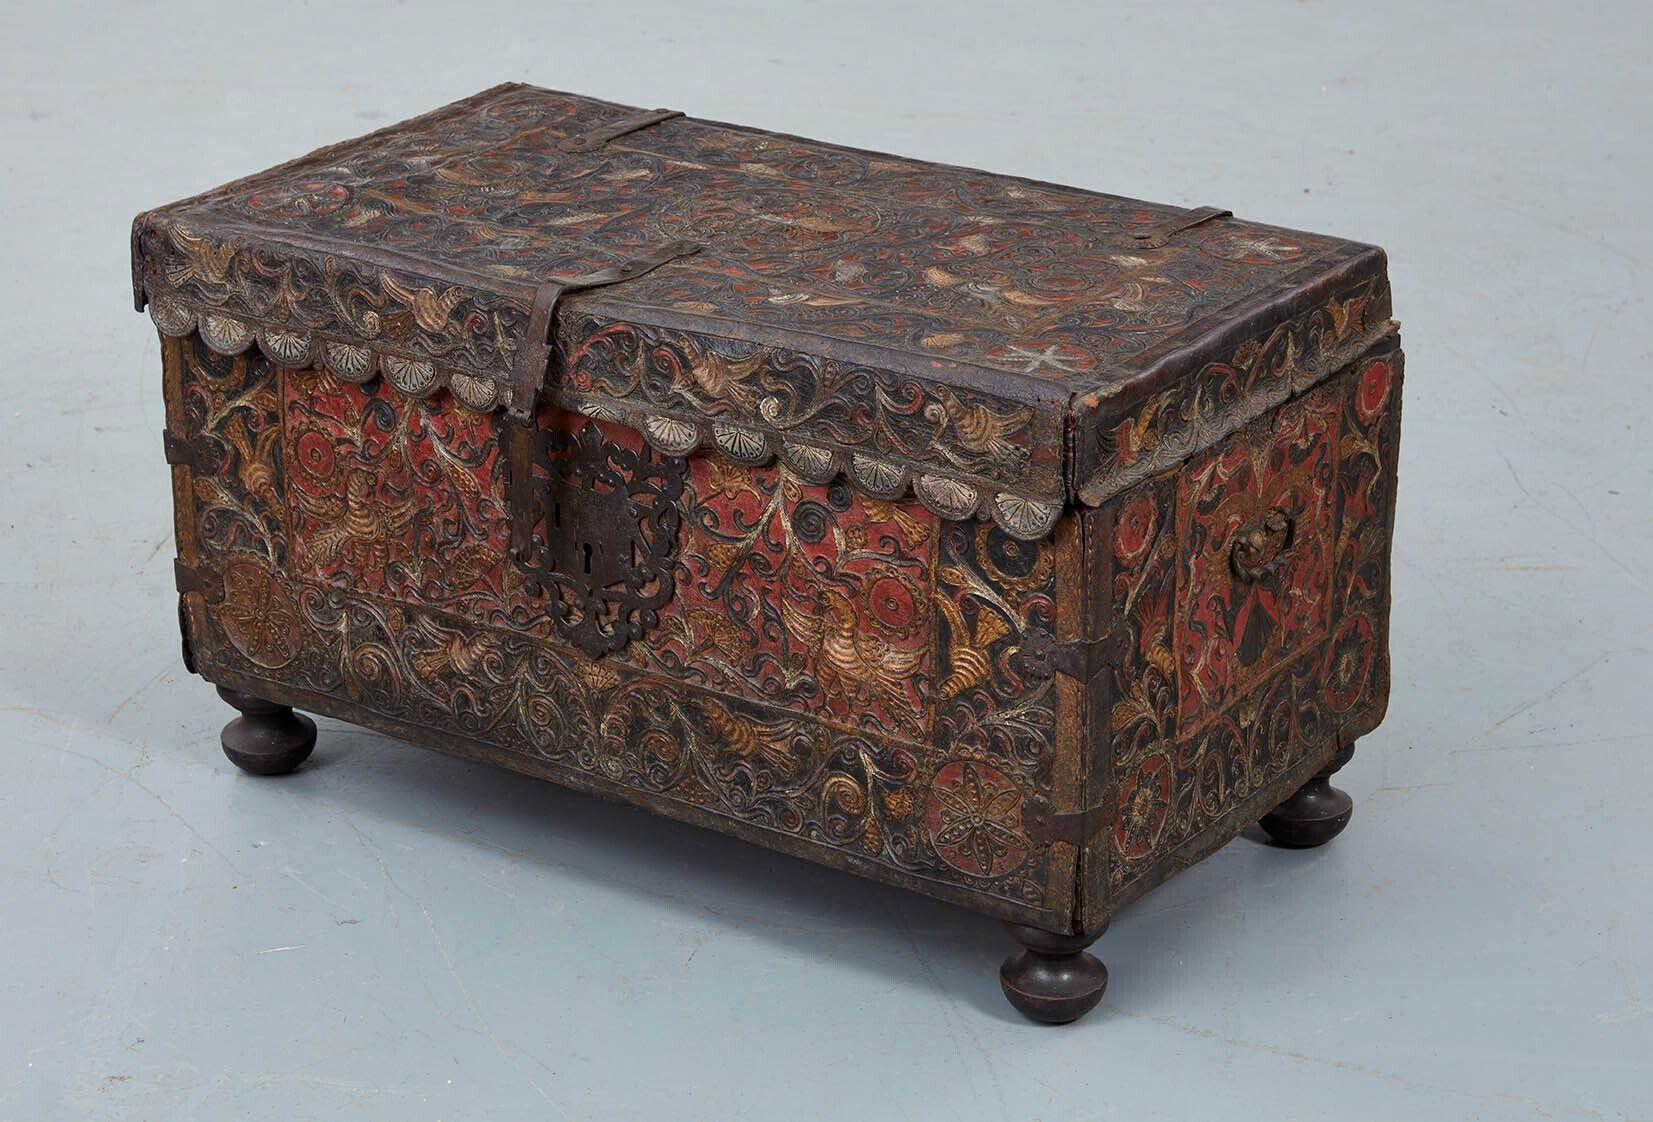 Peruvian Polychromed Spanish Colonial Leather Trunk For Sale